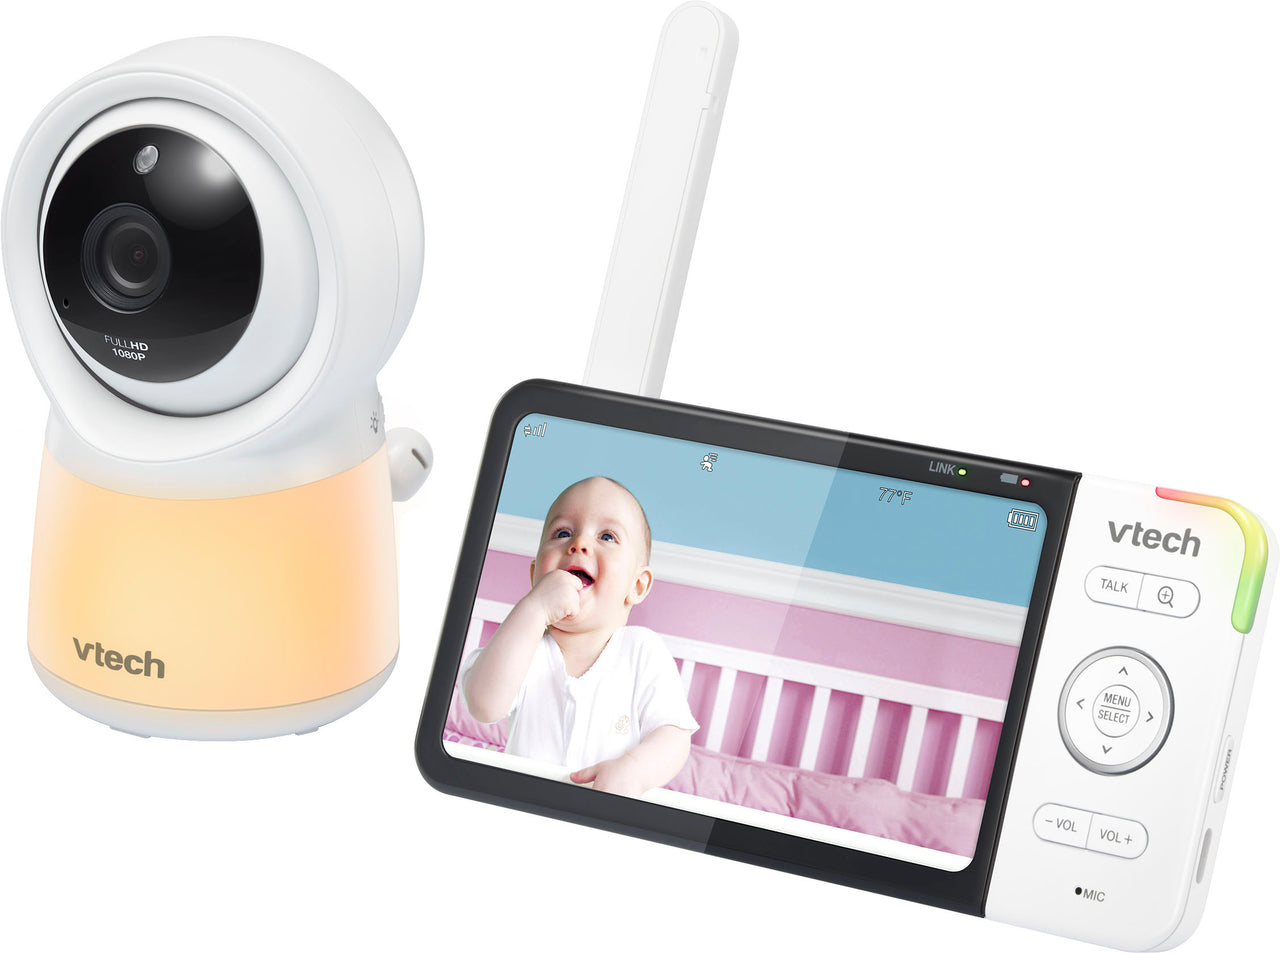 VTech - Smart Wi-Fi Video Baby Monitor w/ 5” HC Display and 1080p HD Camera, Built-in night light, RM5754HD - White